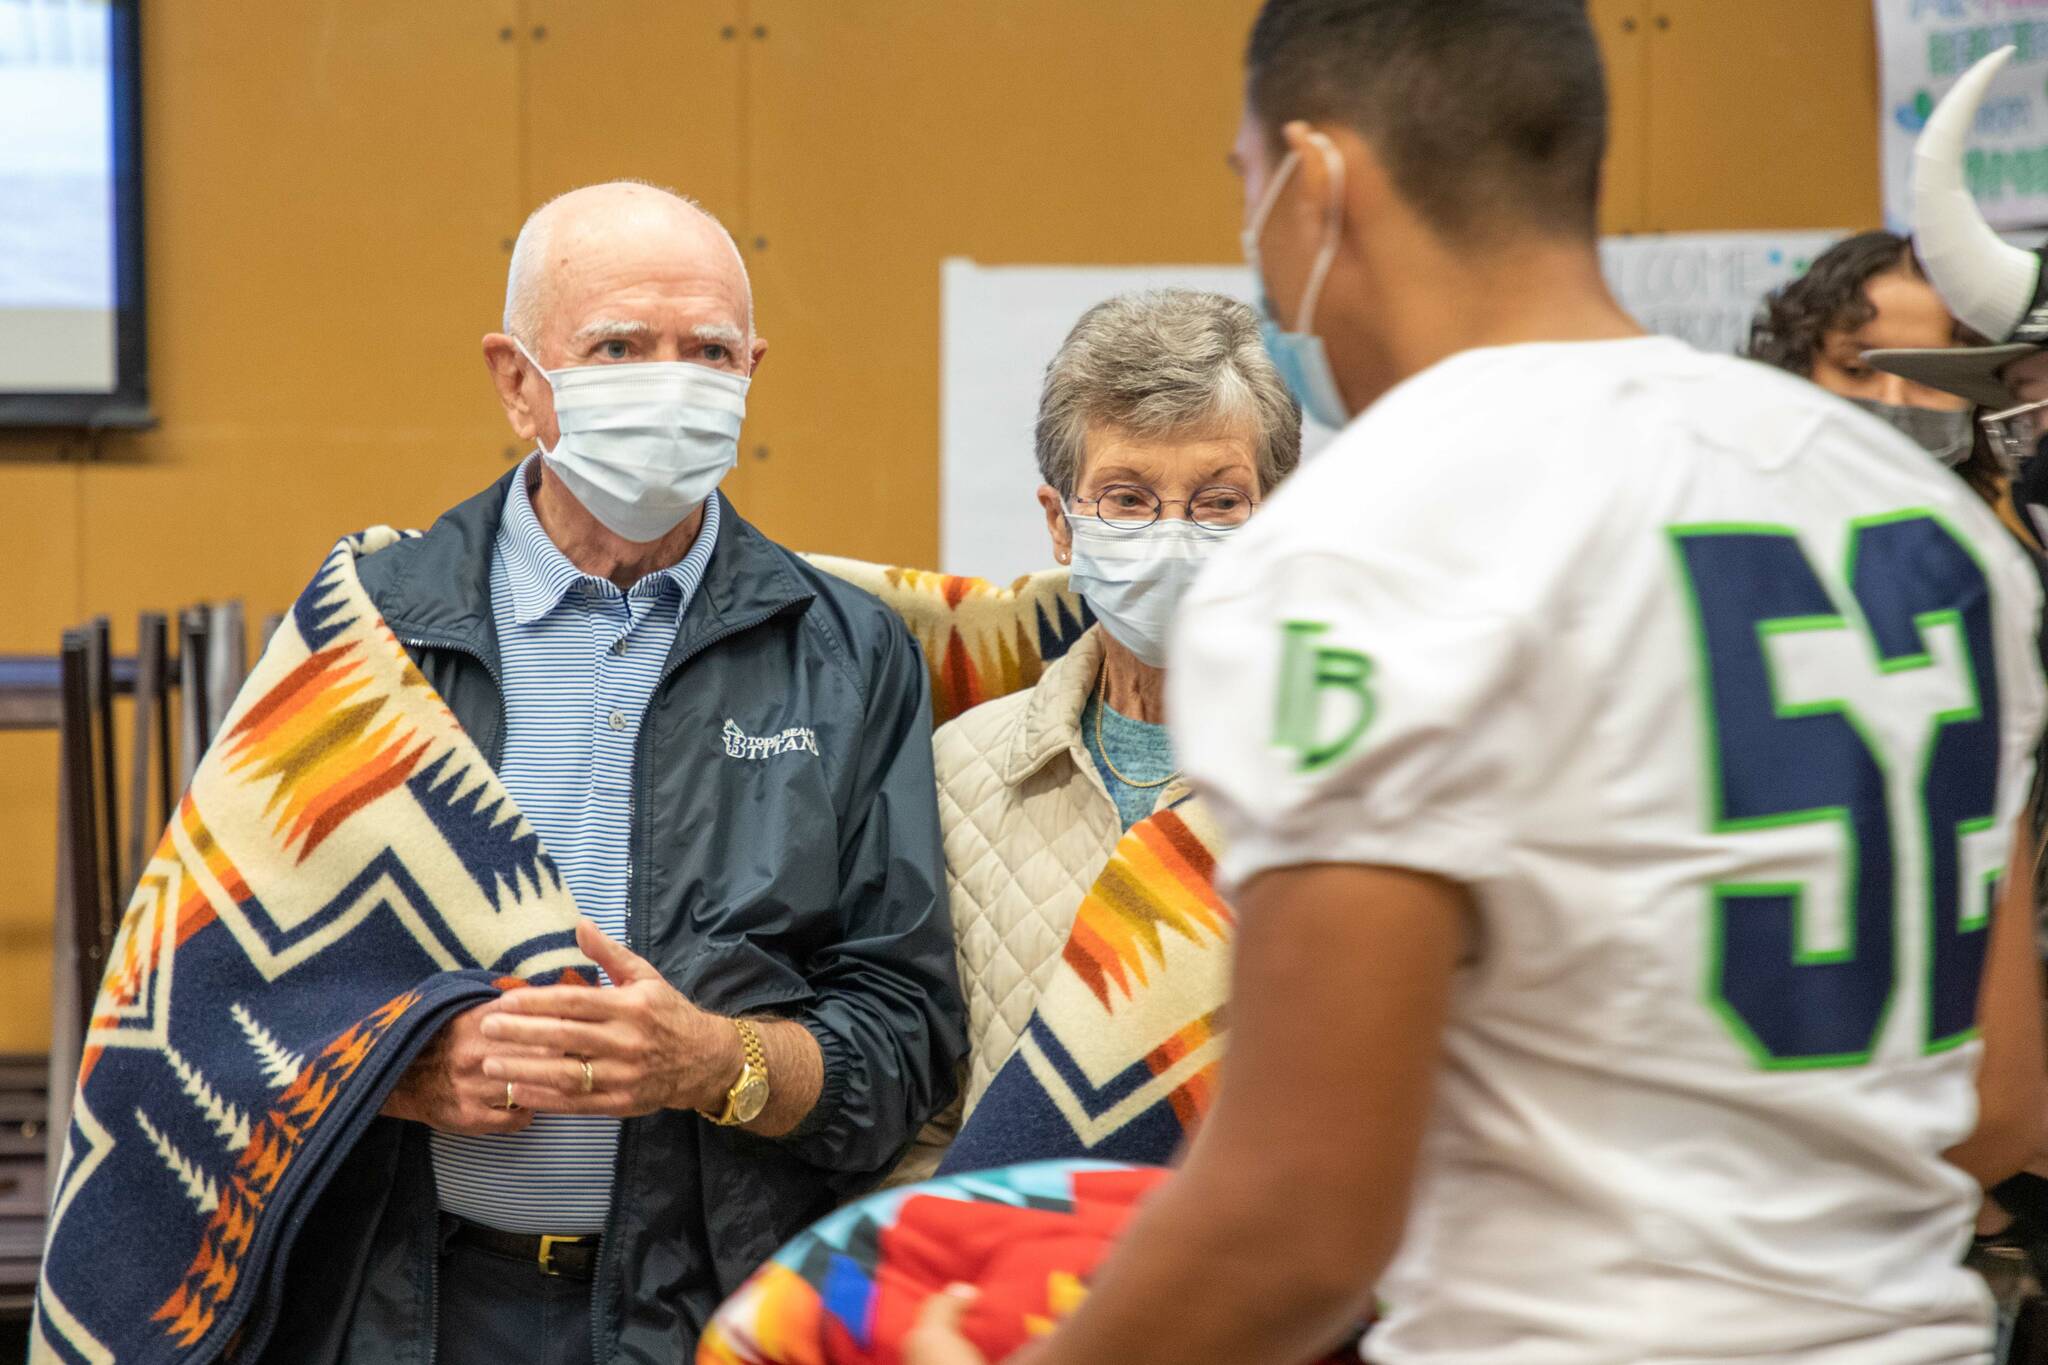 David and Peggy Beamer visited Todd Beamer High School, named after their son Todd Beamer, on Sept. 10. The Beamers were given a traditional blanket by the Native Education Program, a bereavement practice honoring mourning and moving forward. Photo courtesy of Federal Way Public Schools